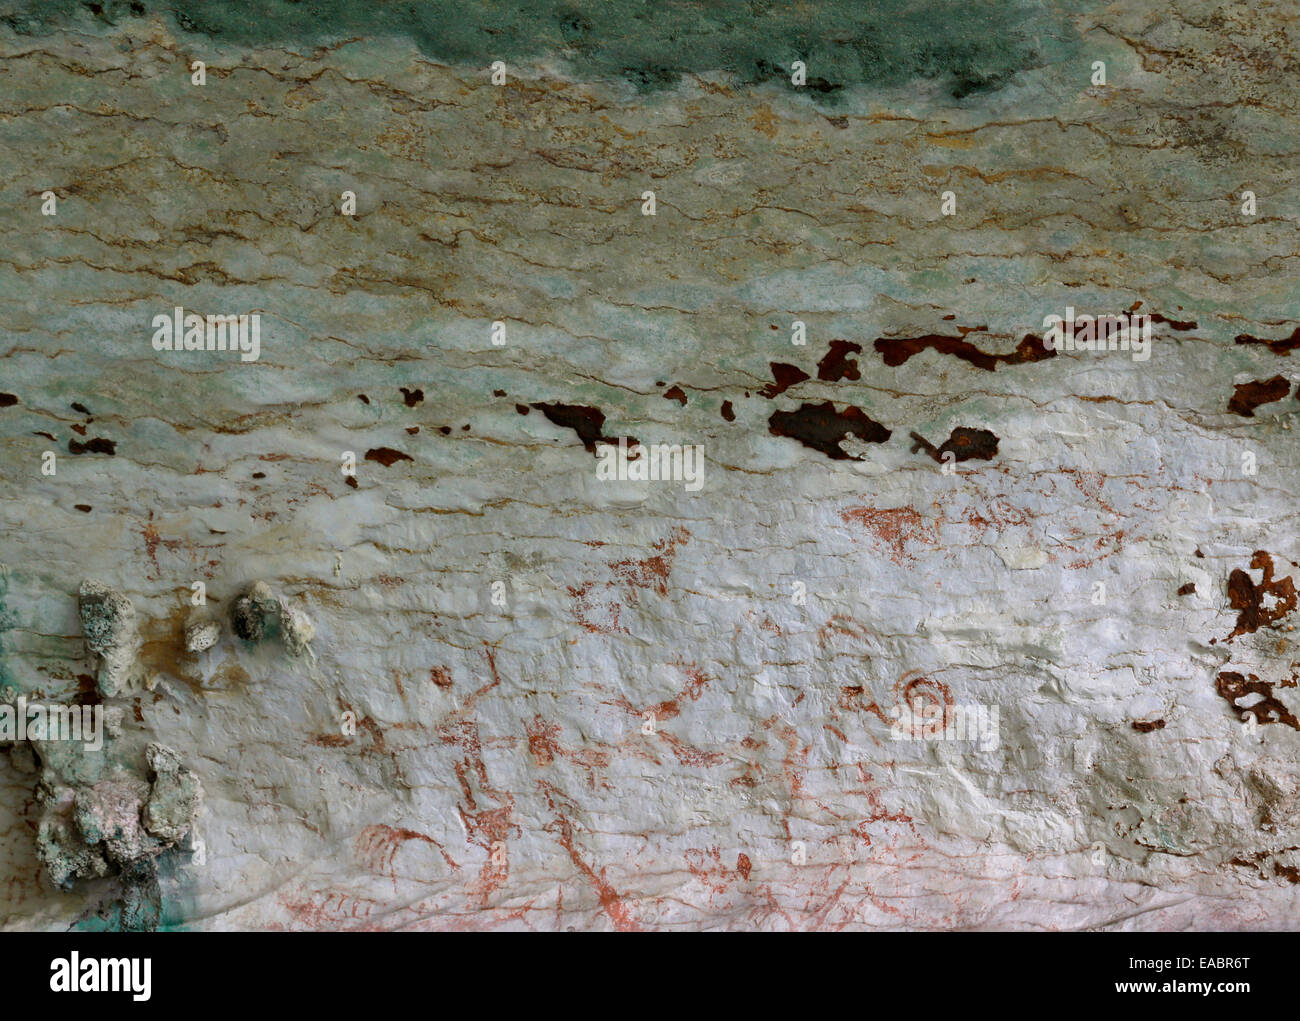 Prehistoric wall paintings at the Painted Cave in Niah National Park, Sarawak, Malaysia Stock Photo